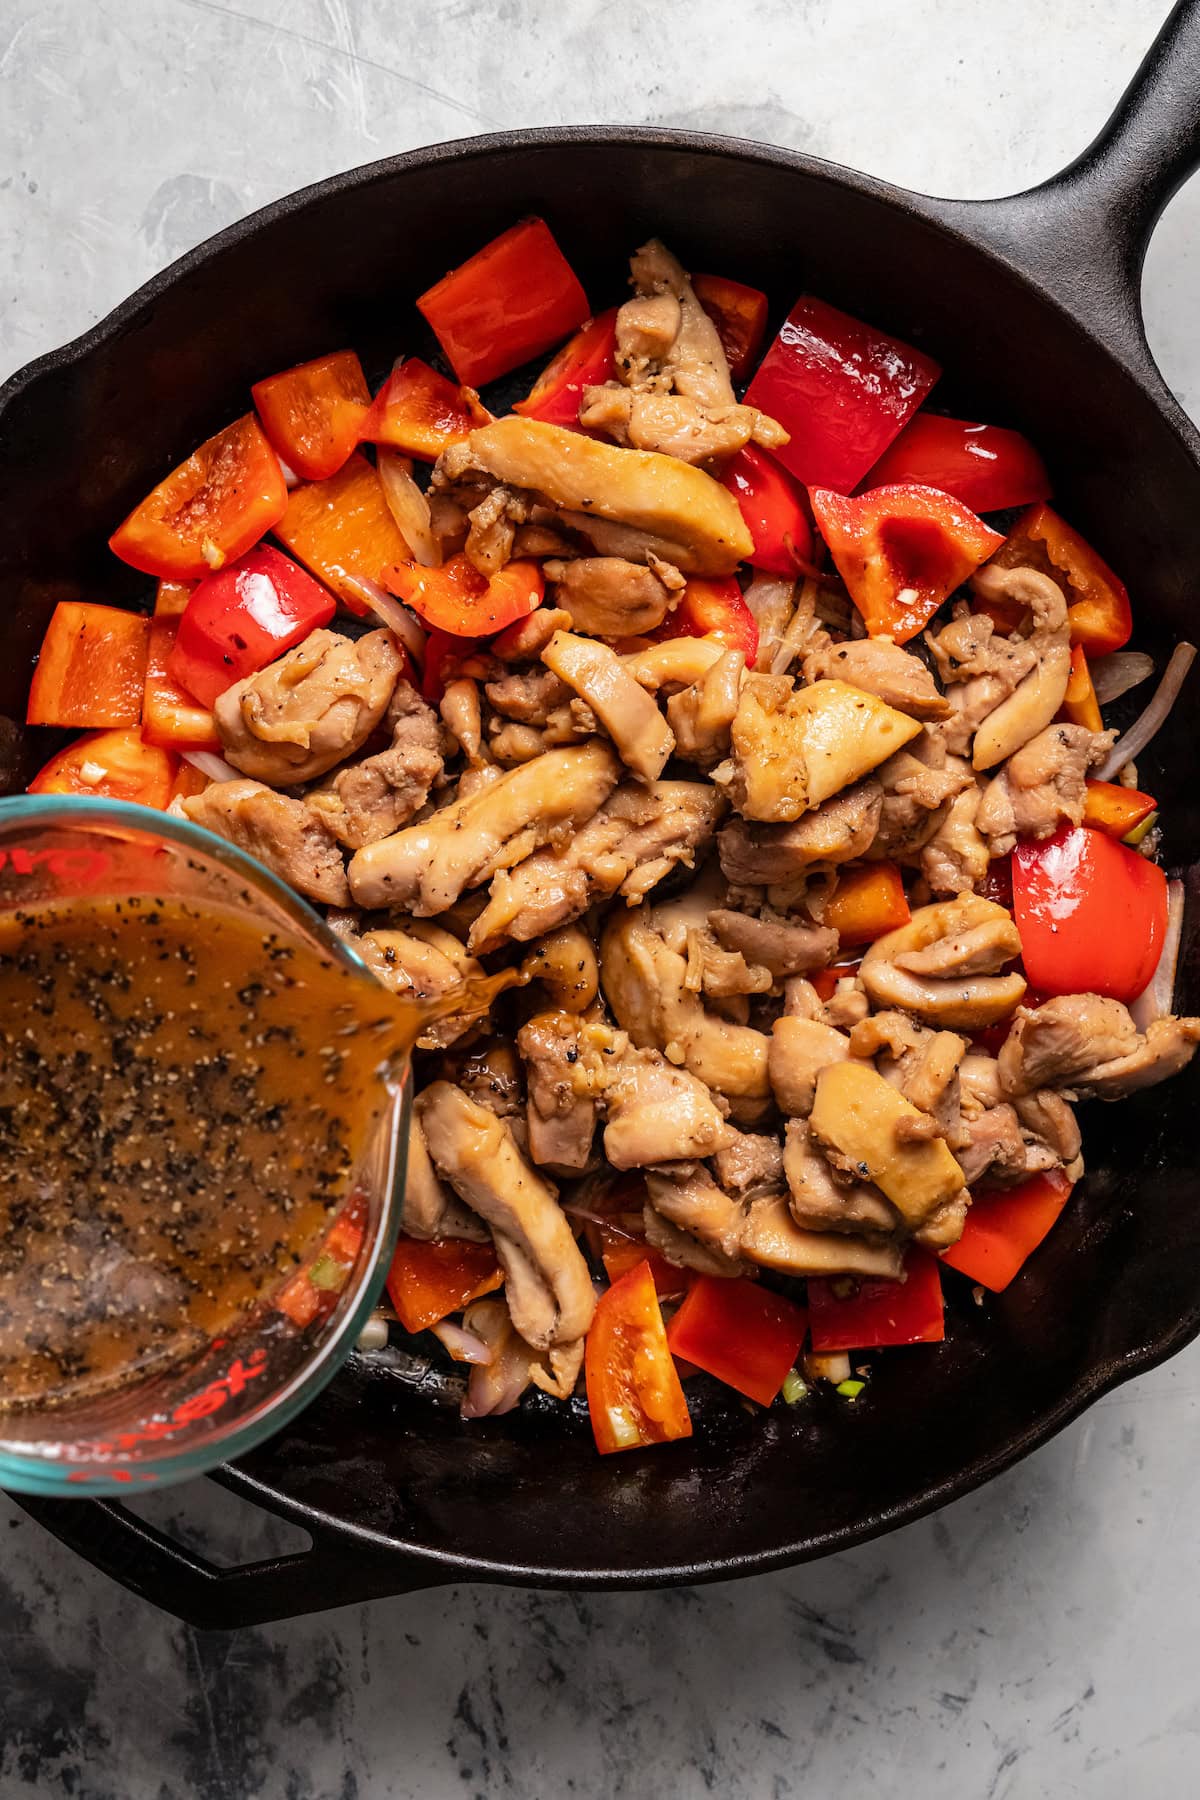 Black pepper marinade being poured over sauteed chicken and bell peppers in a skillet.